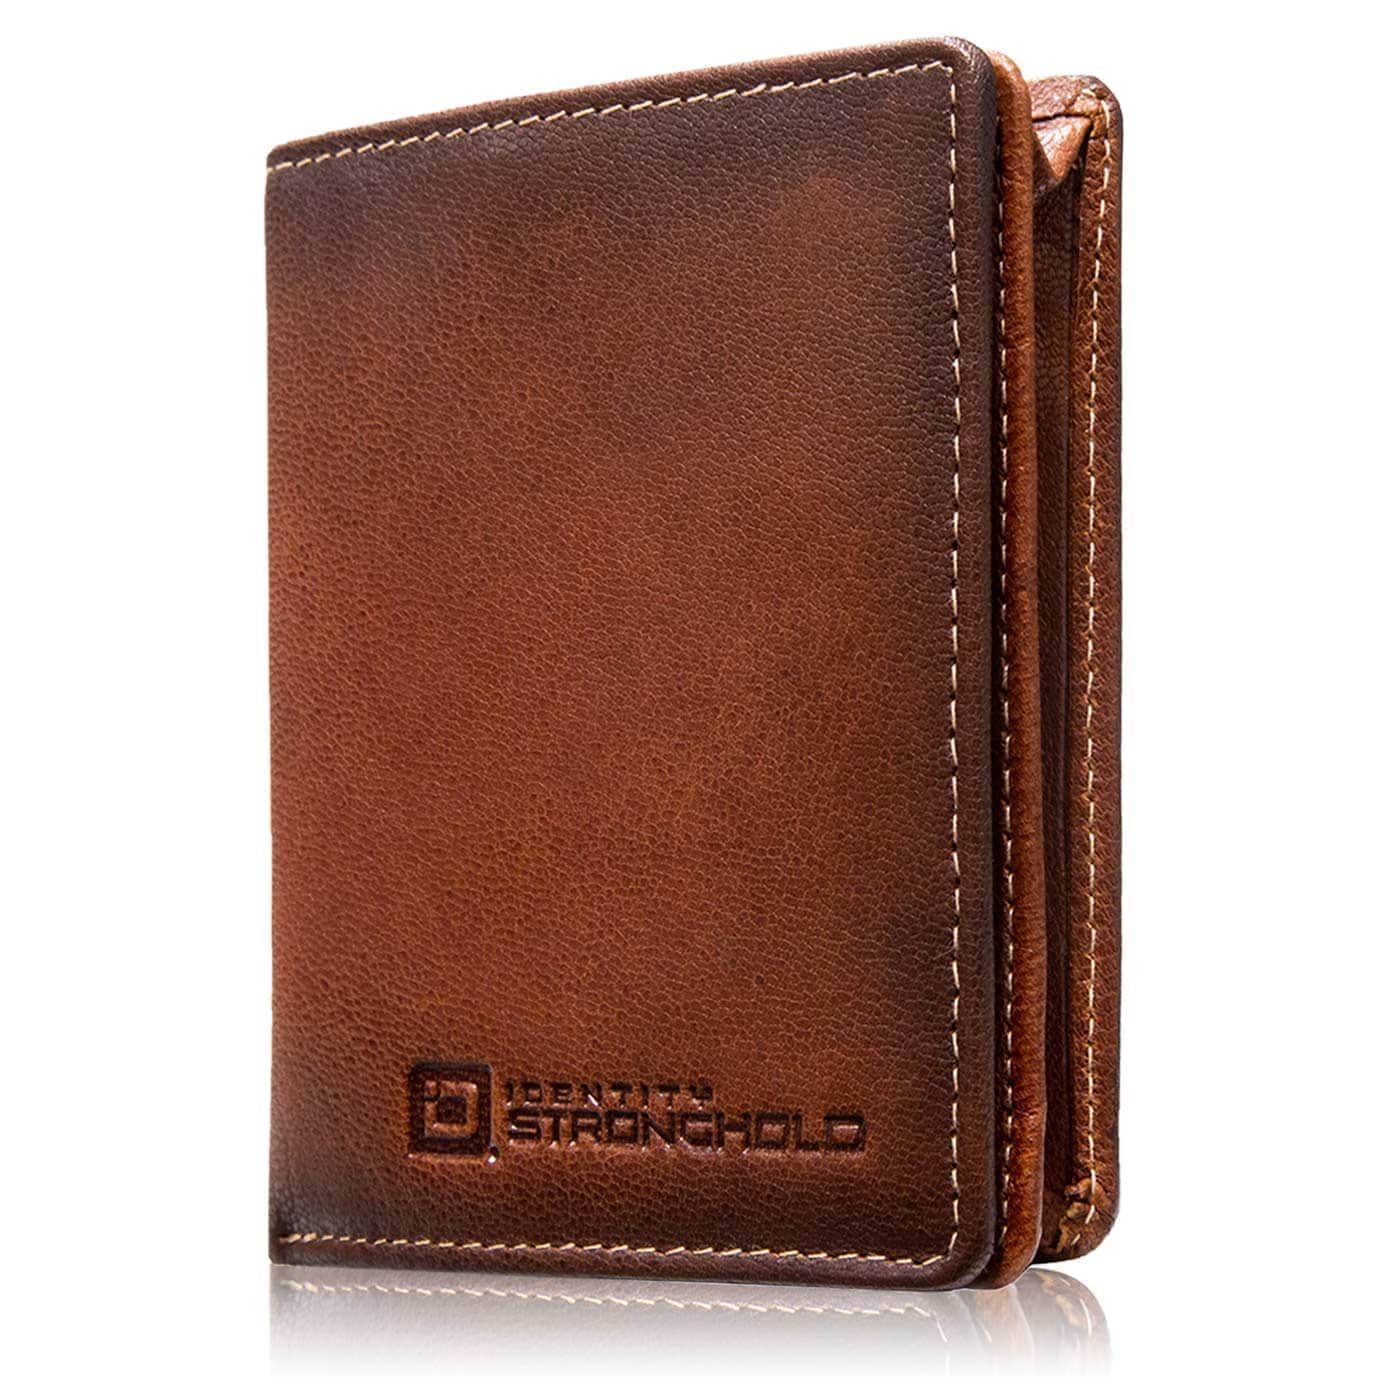 ID Stronghold | Leather RFID Wallets Online USA